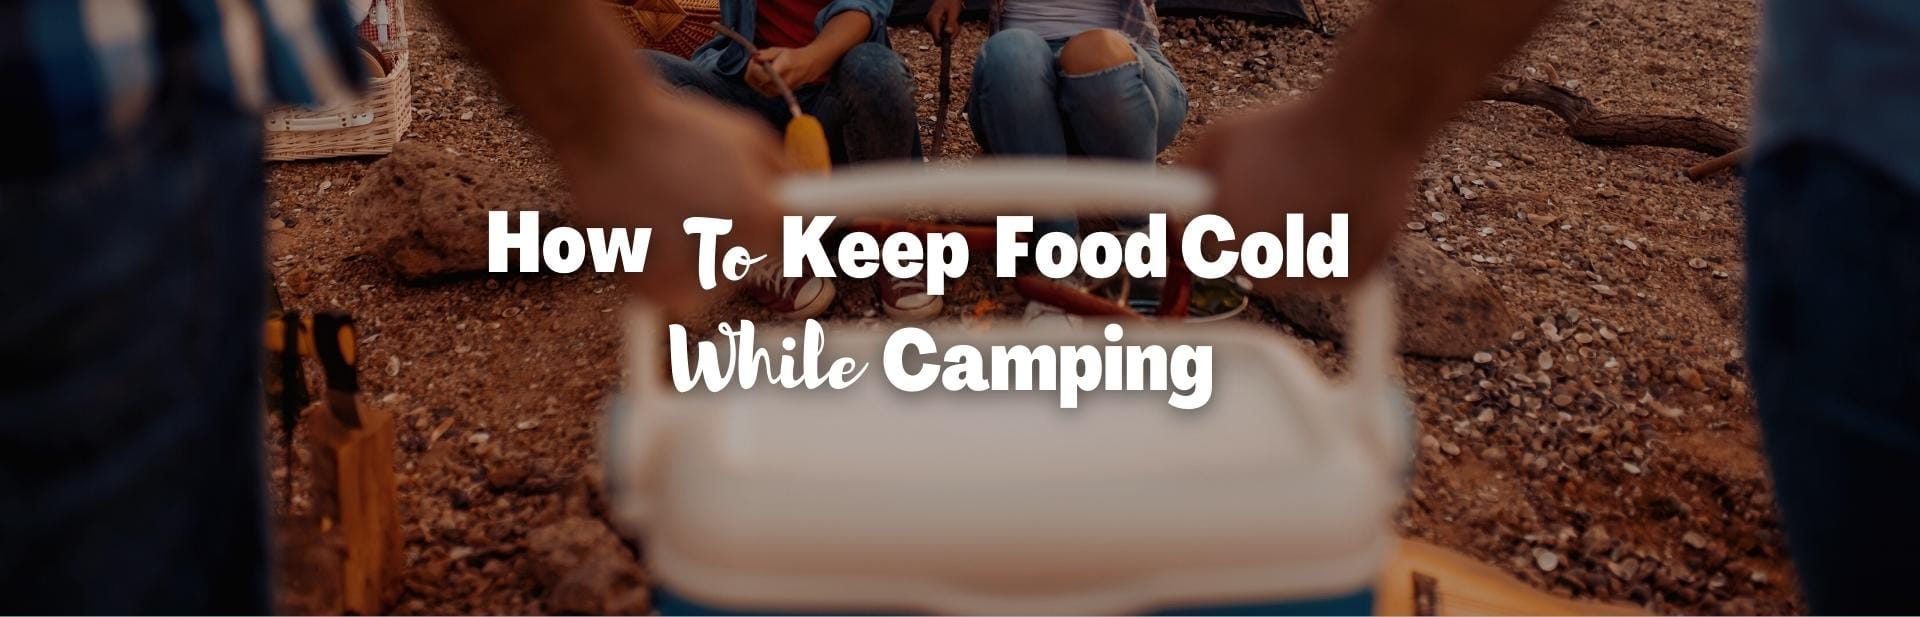 How To Keep Food Cold While Camping